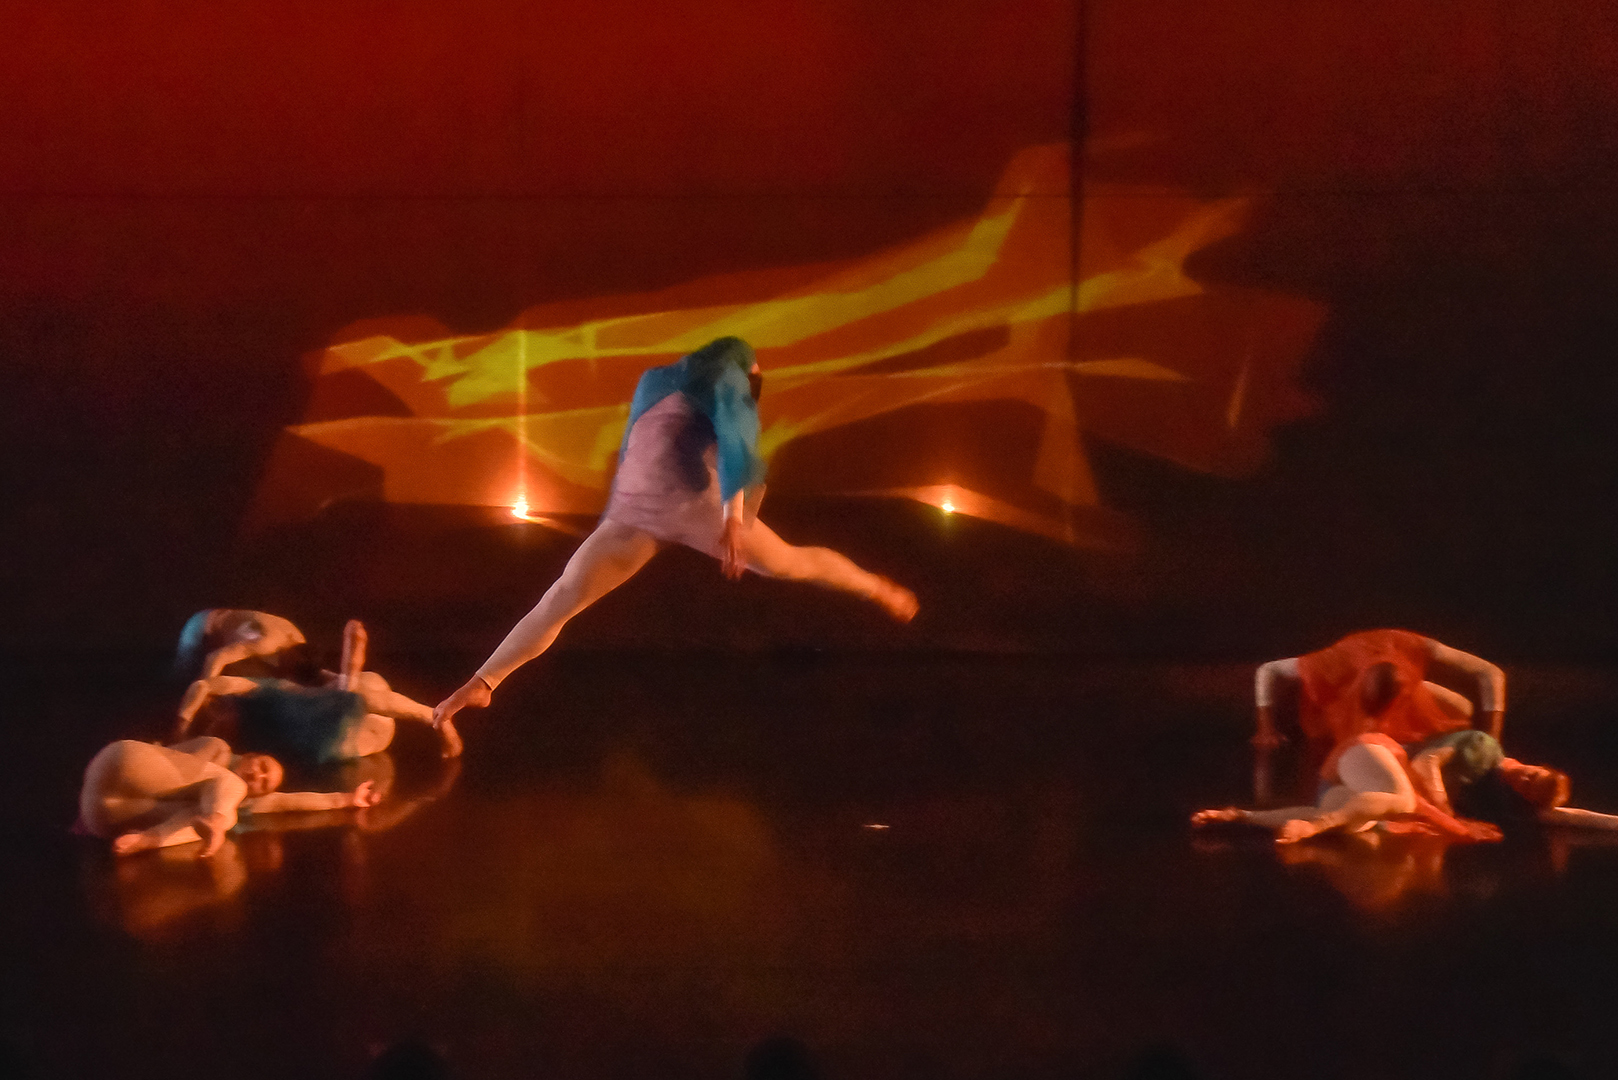 ESDC dancer leaping above fellow dancers in front of fiery polygonal trails during Kaatsbaan residency.